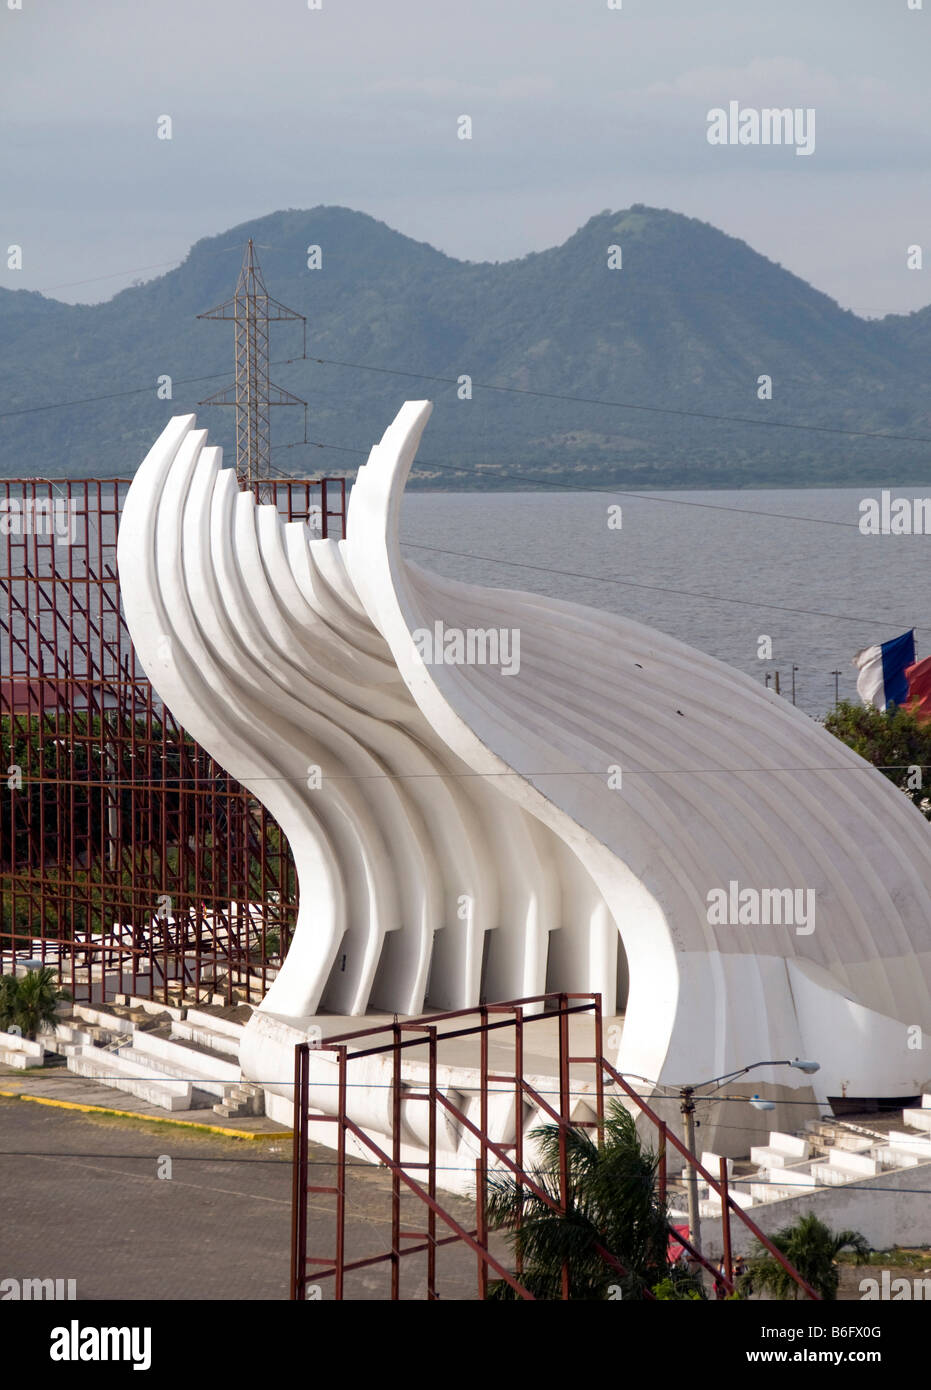 La Concha Acustica the acoustic shell music stadium on Lake Managau Nicaragua with active volcano in background Stock Photo